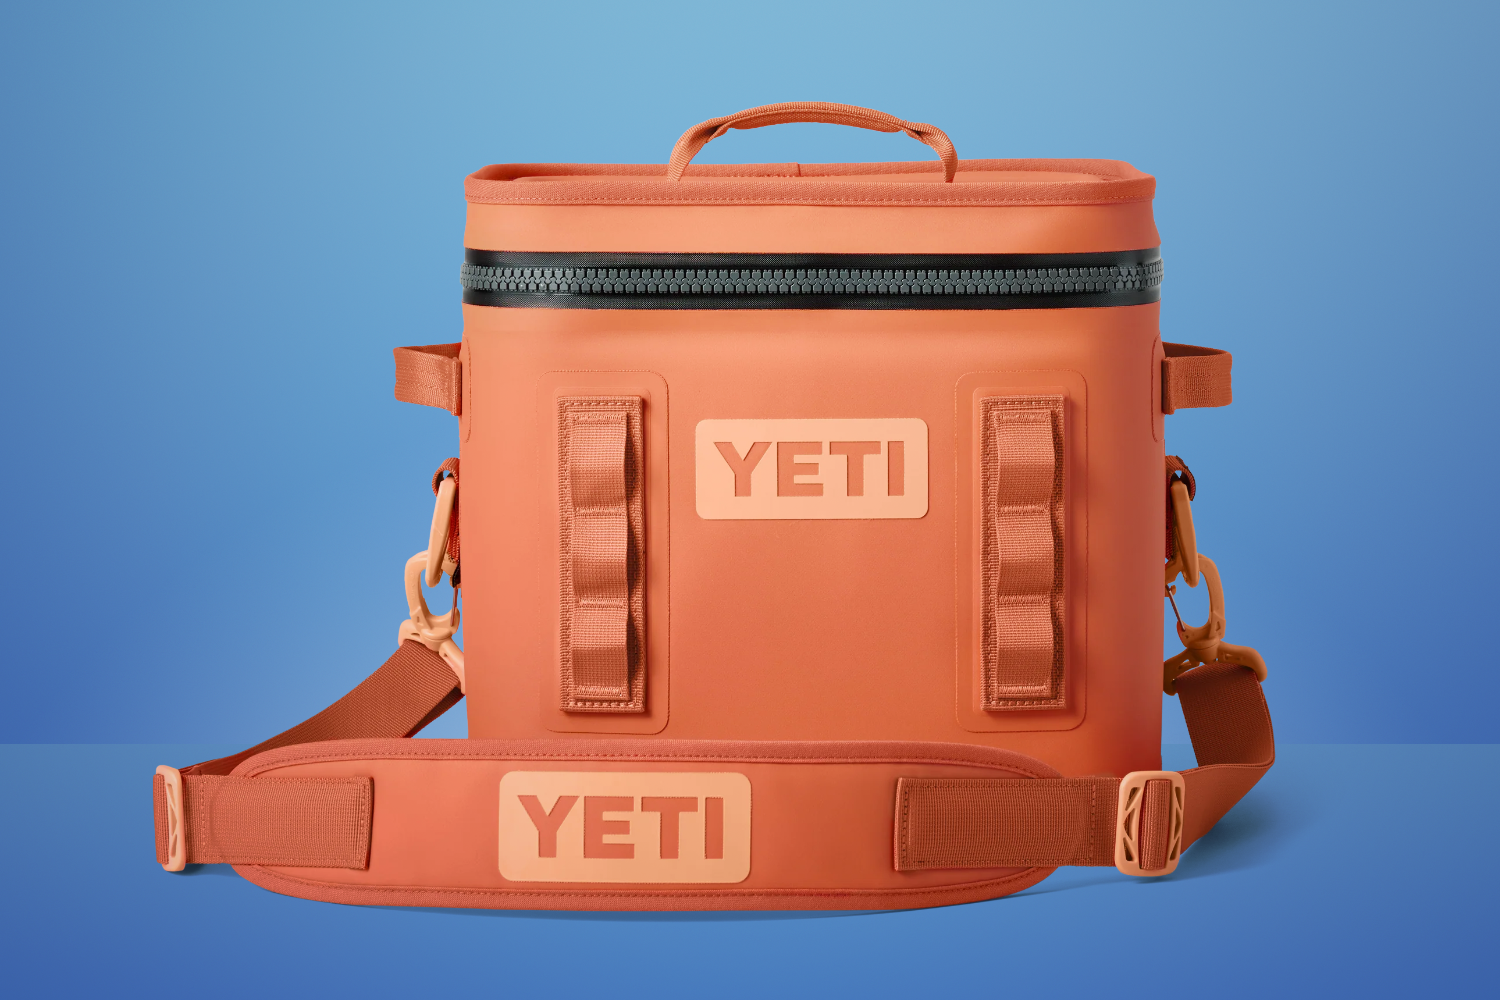 Unless You Are a Hardcore Camper, This Is the Only Yeti Cooler You